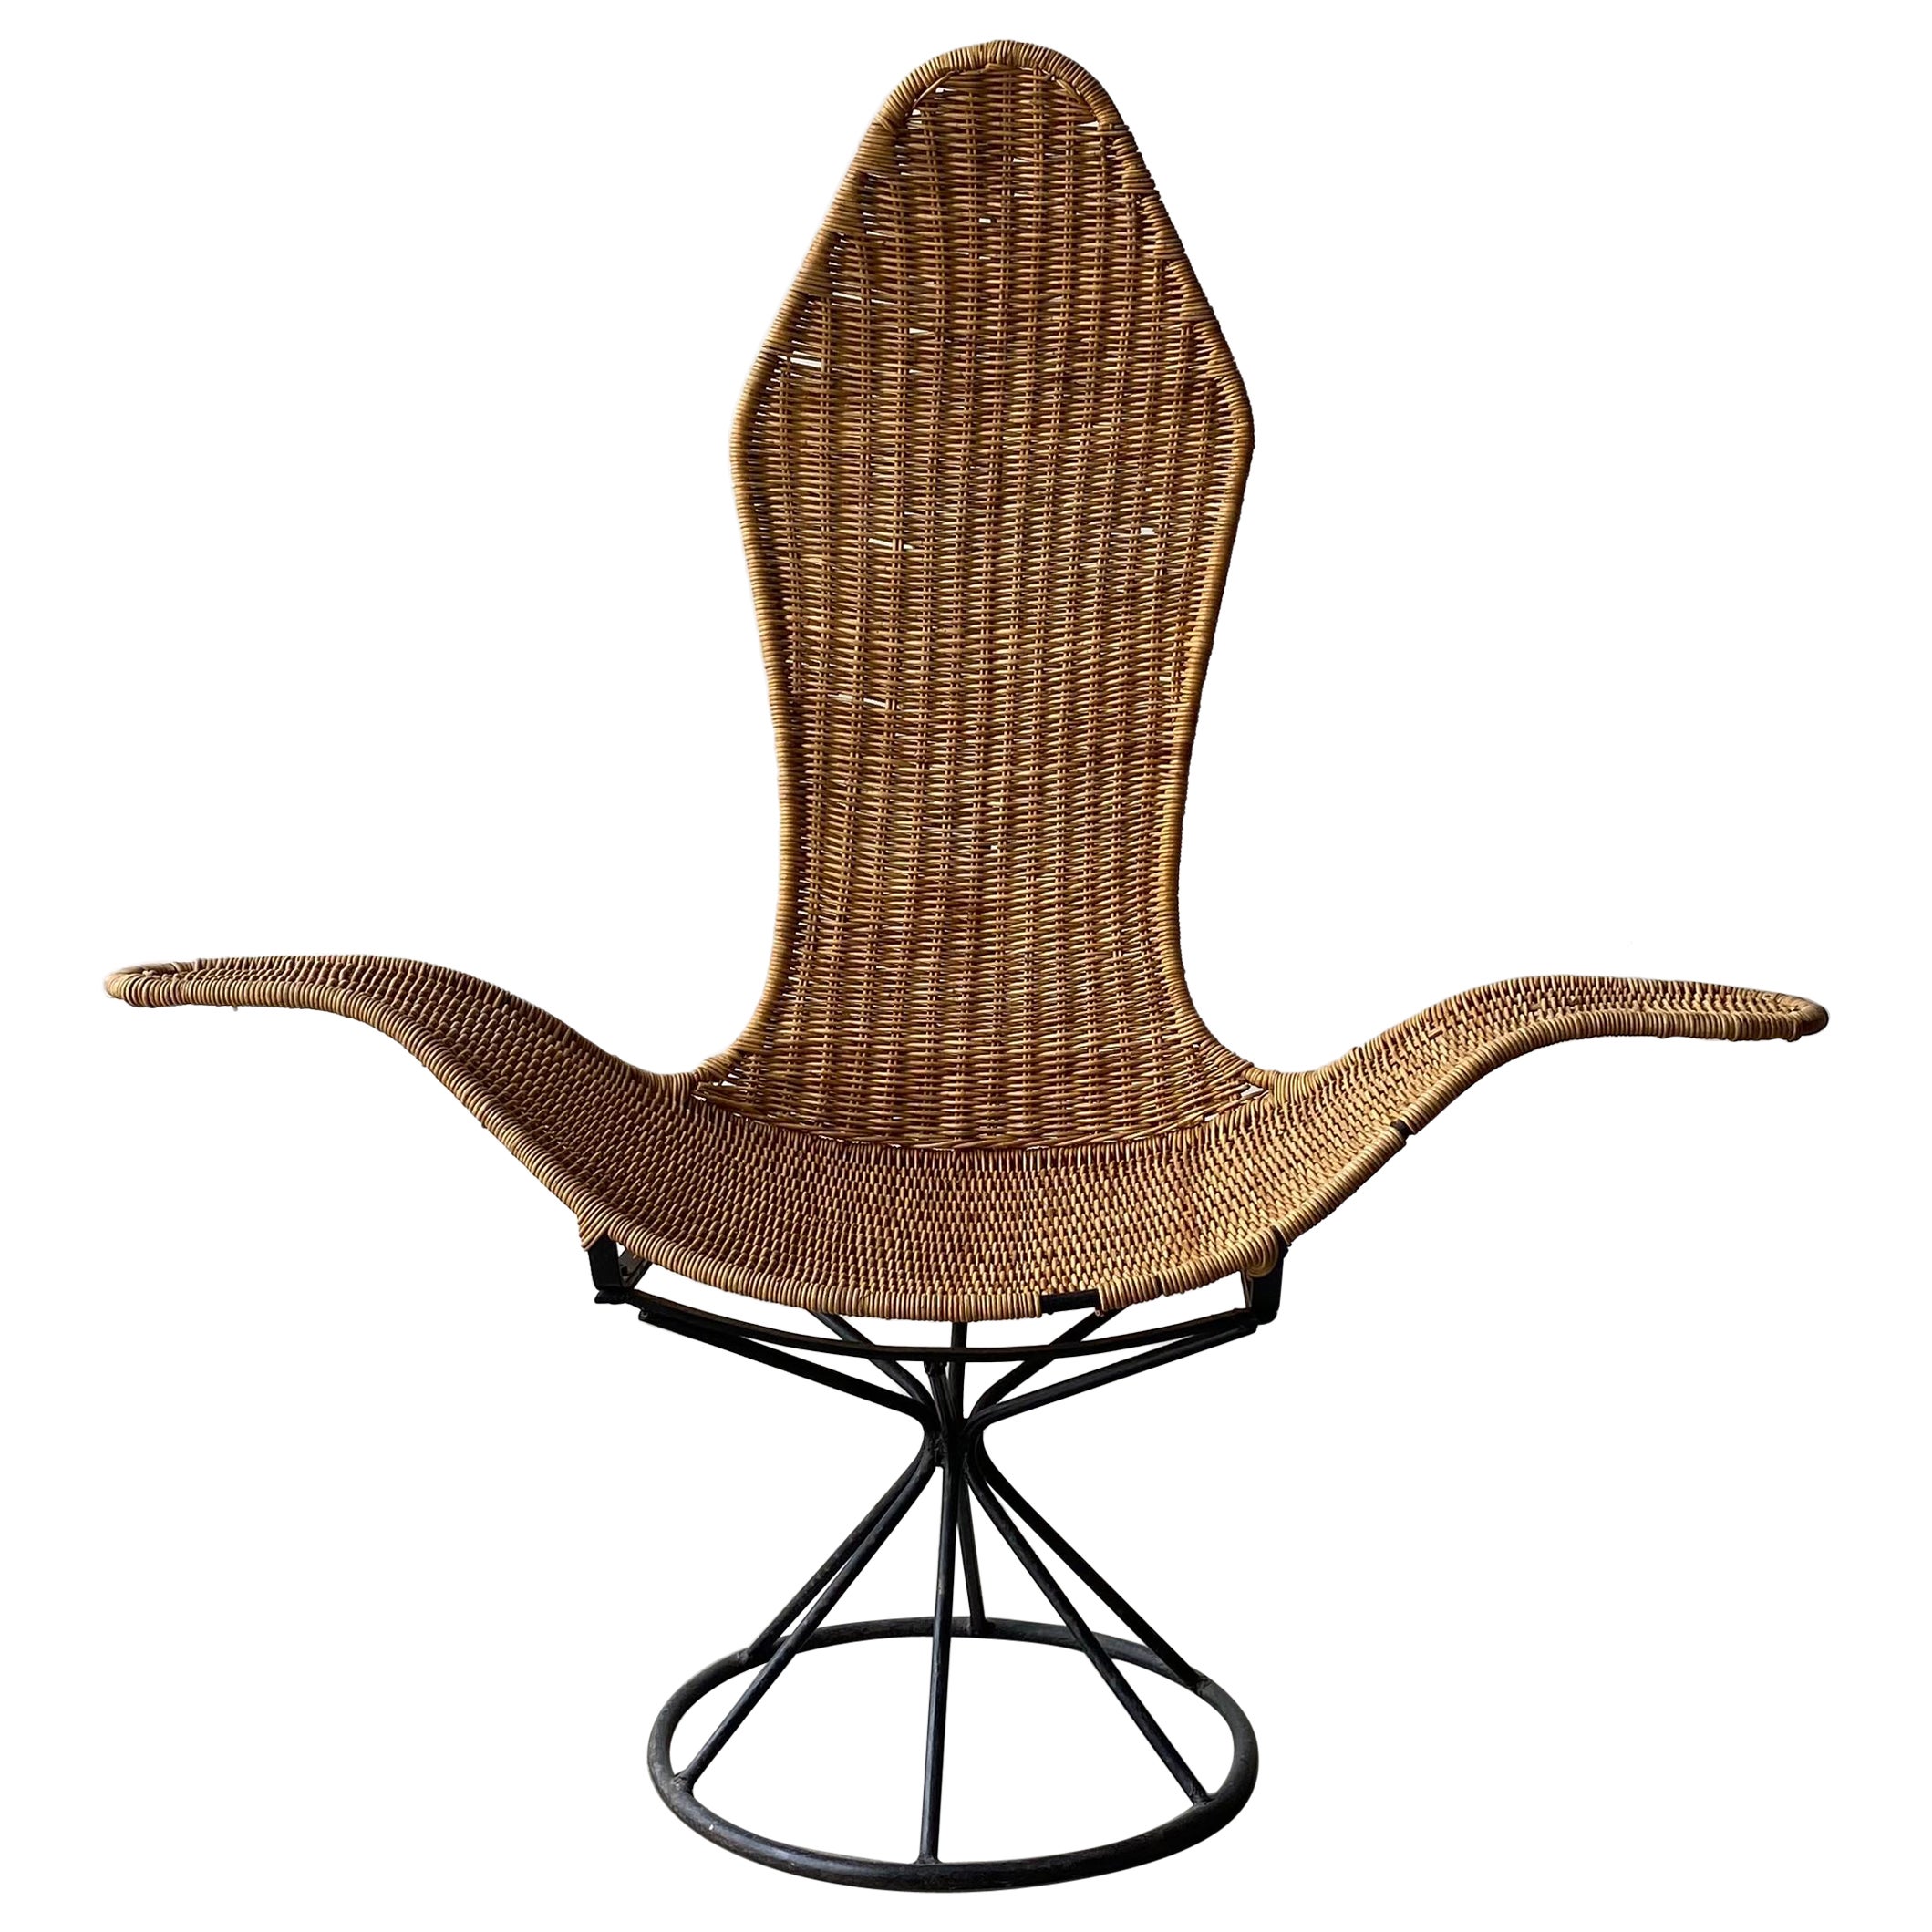 Danny Ho Fong "Wave" Chair, Tropi-Cal For Sale